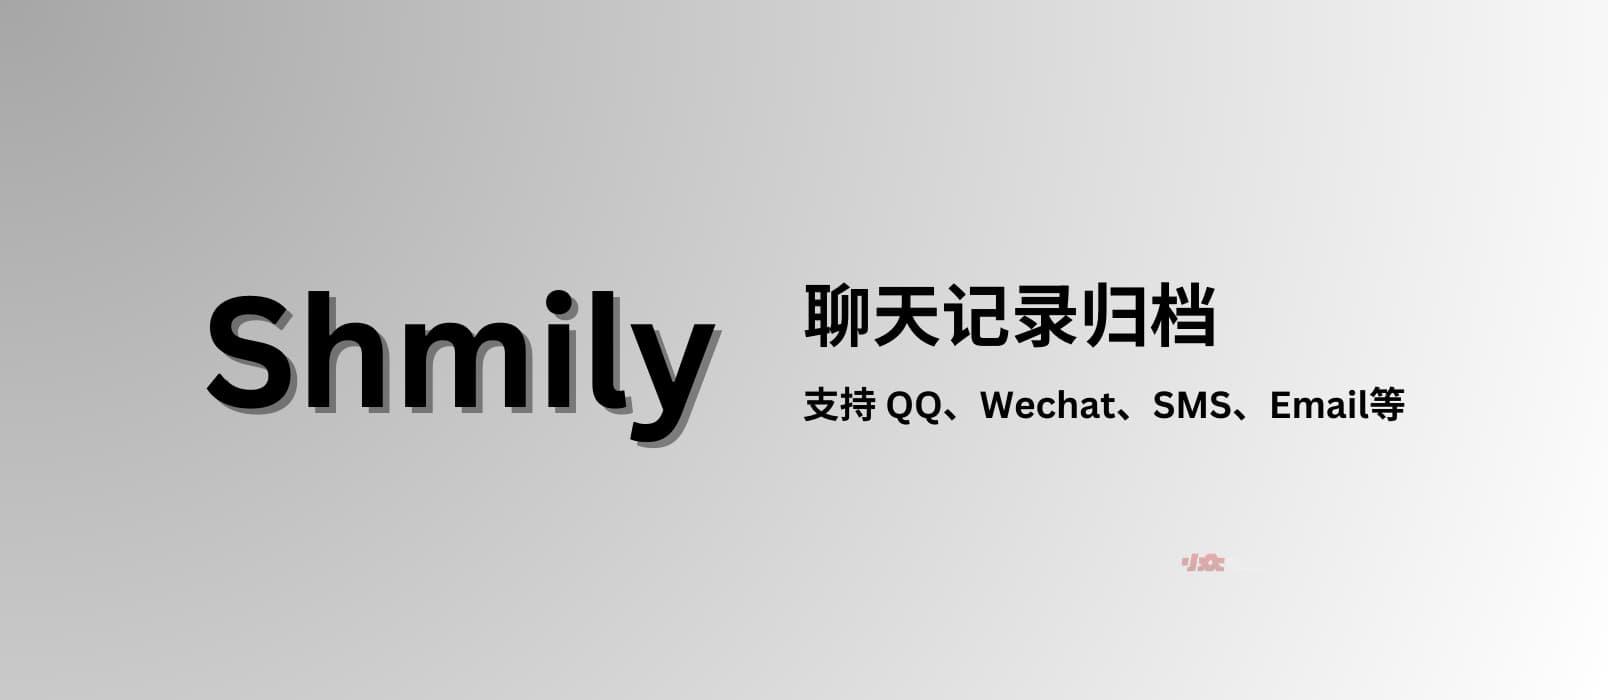 Shmily - Chat Record Archive, Supports QQ, WeChat, SMS, Email, etc.